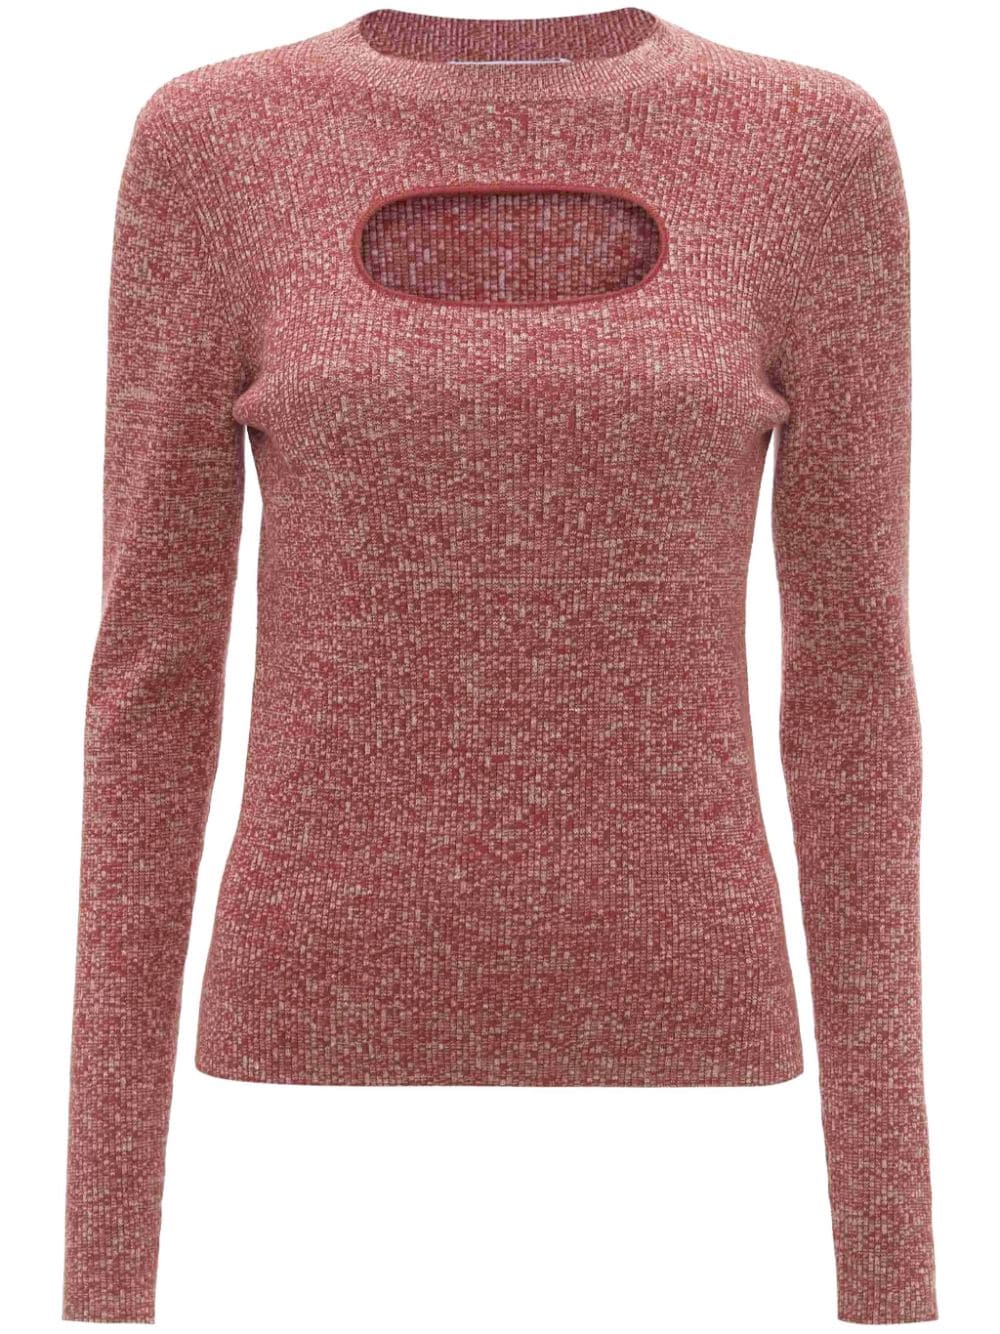 JW Anderson cut-out long-sleeve top - Pink